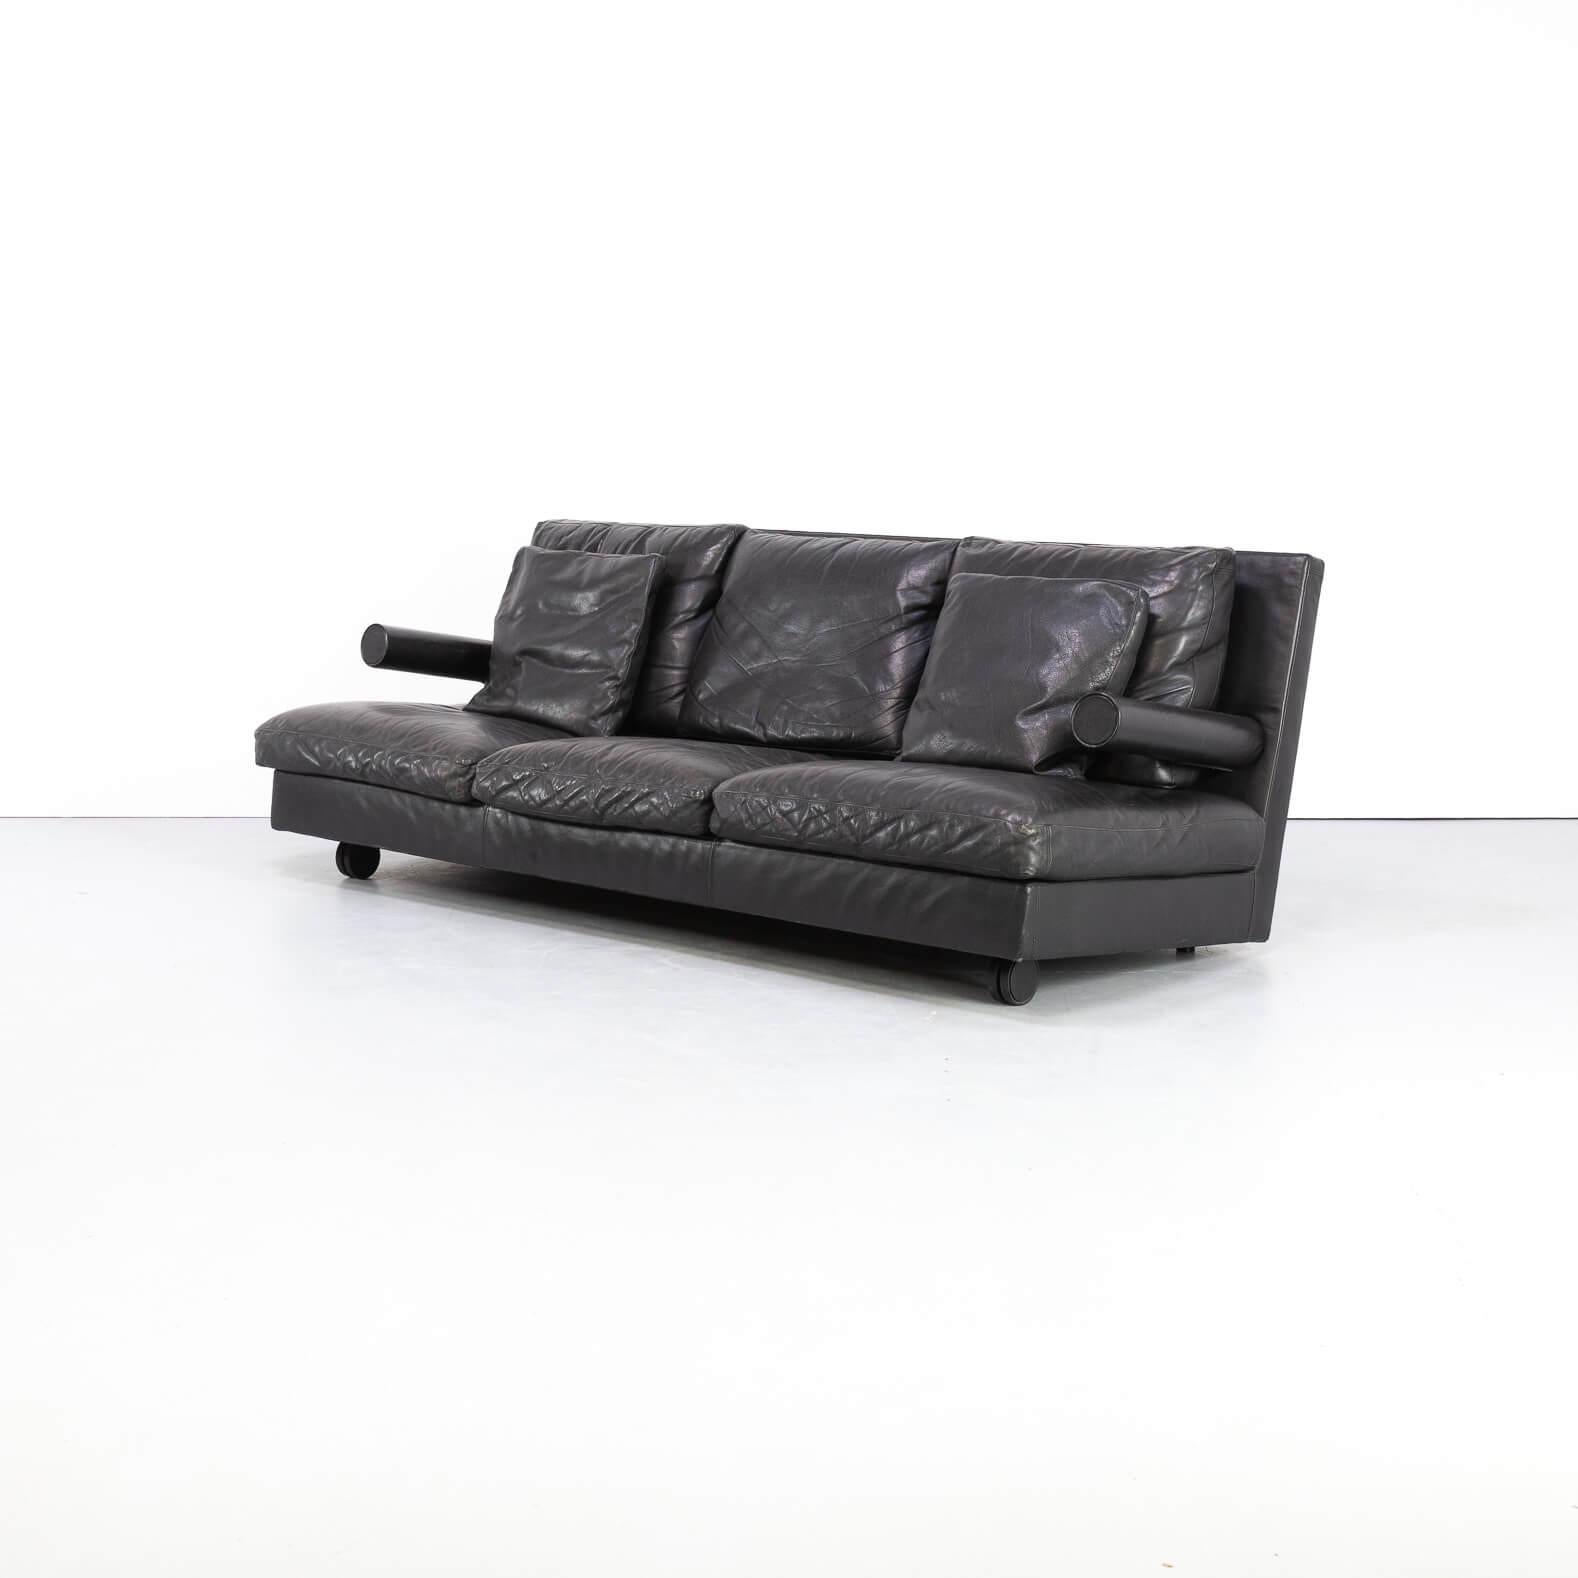 The single-seat fauteuil model Baisity created in 1986 by Antonio Citterio won the Compasso d’oro a year later with this design. Followed with a Baisity three seat sofa. Beautiful and comfortable seating and very rare. The sofa has two wheels